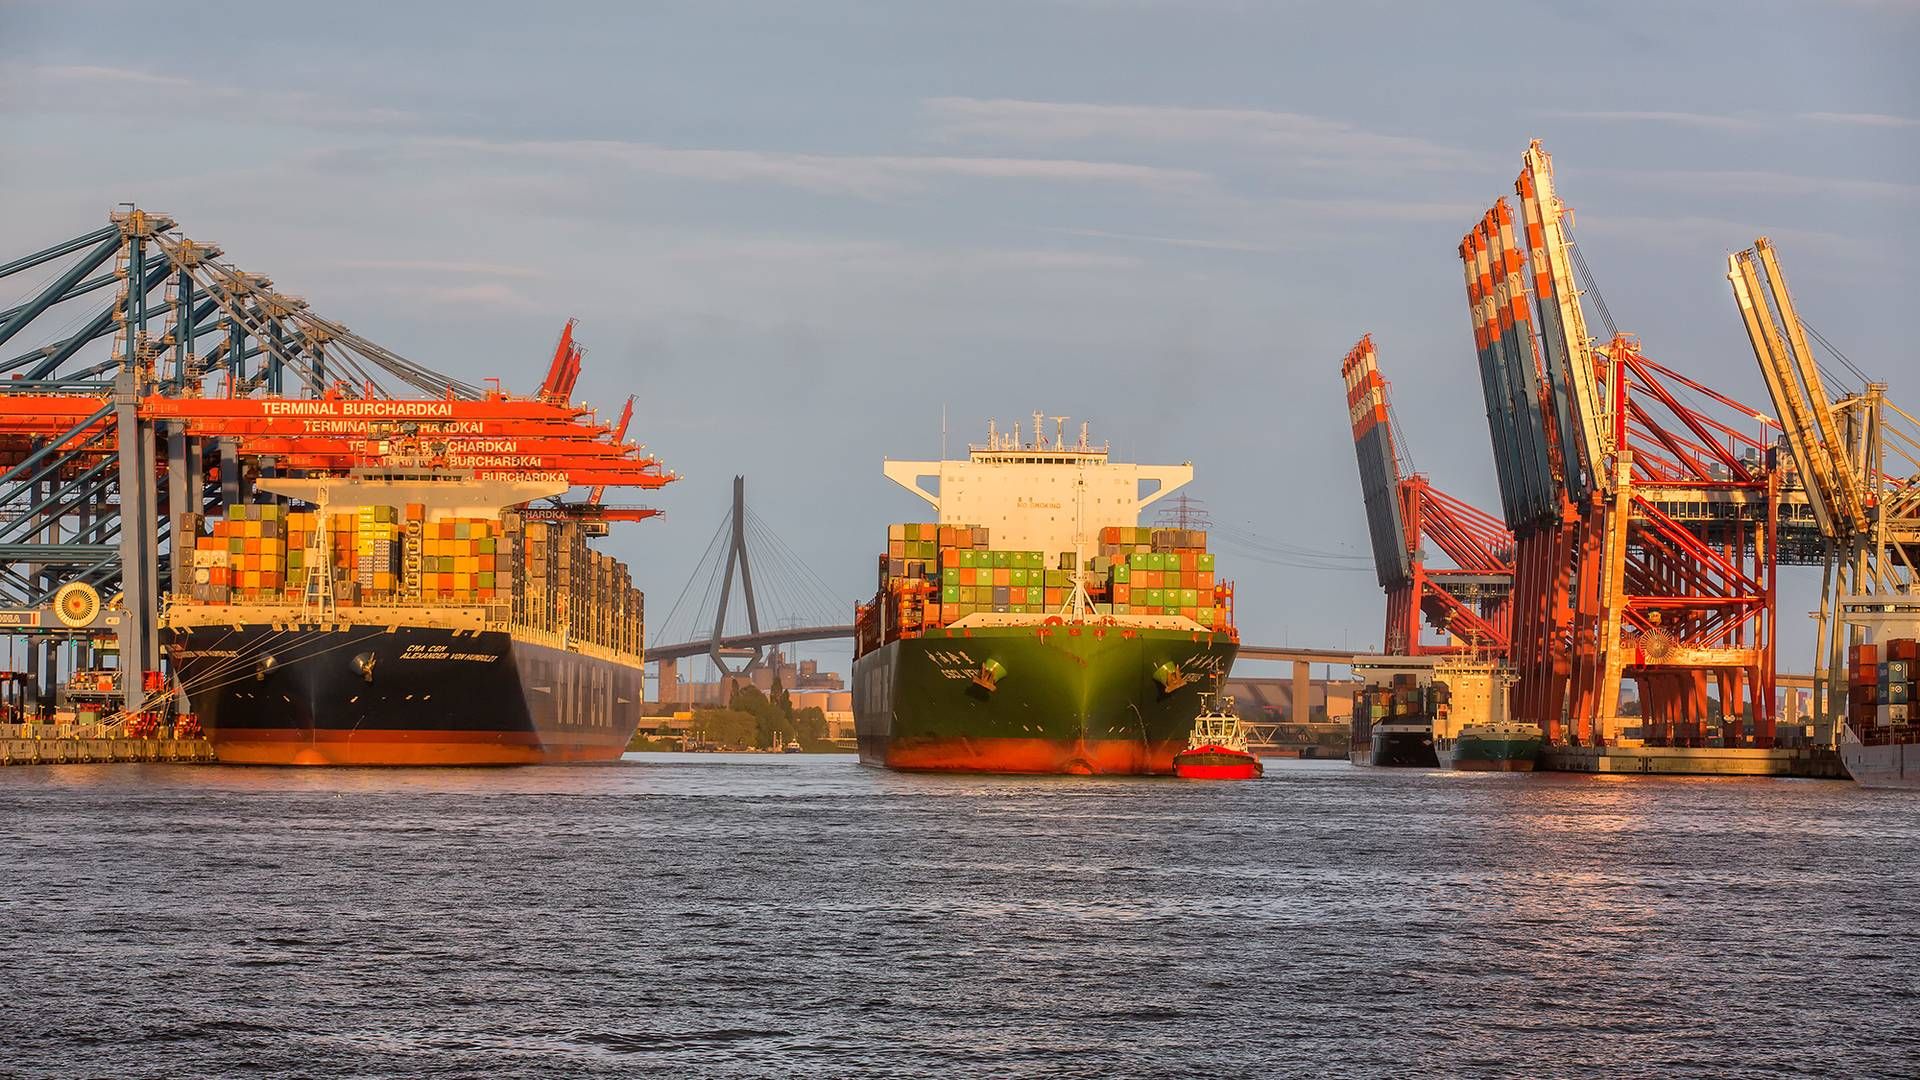 The Hamburg-based terminal operator HHLA, which is owned by the city, has selected the container shipping company MSC as a strategic partner. | Photo: Pr / Dietmar Hapenpusch / Port of Hamburg Marketing Association